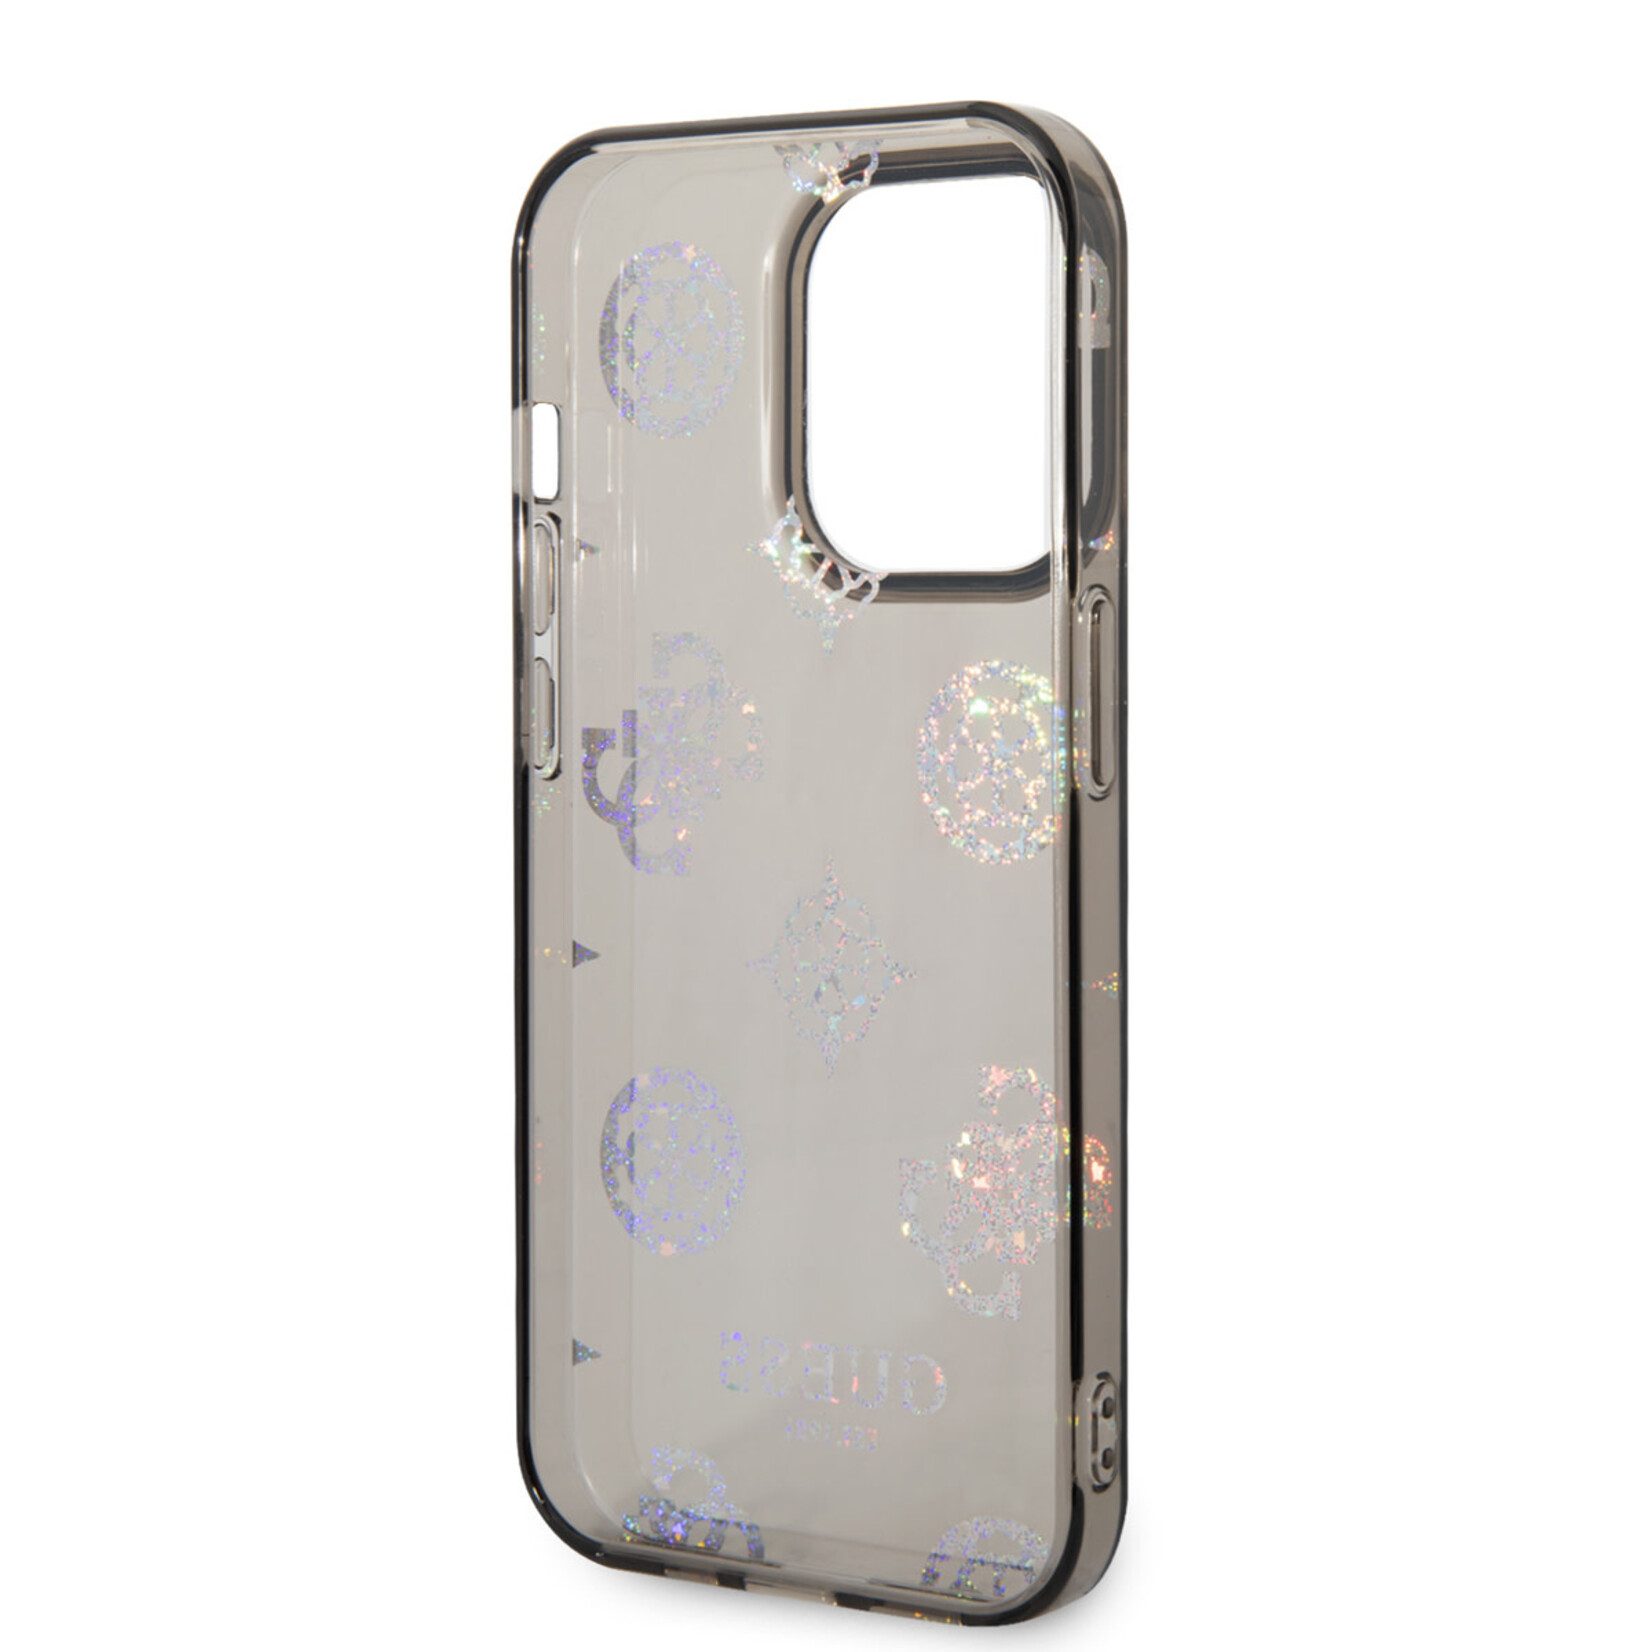 Guess Guess iPhone 14 Pro Hardcase Backcover - Peony Glitter - Zwart